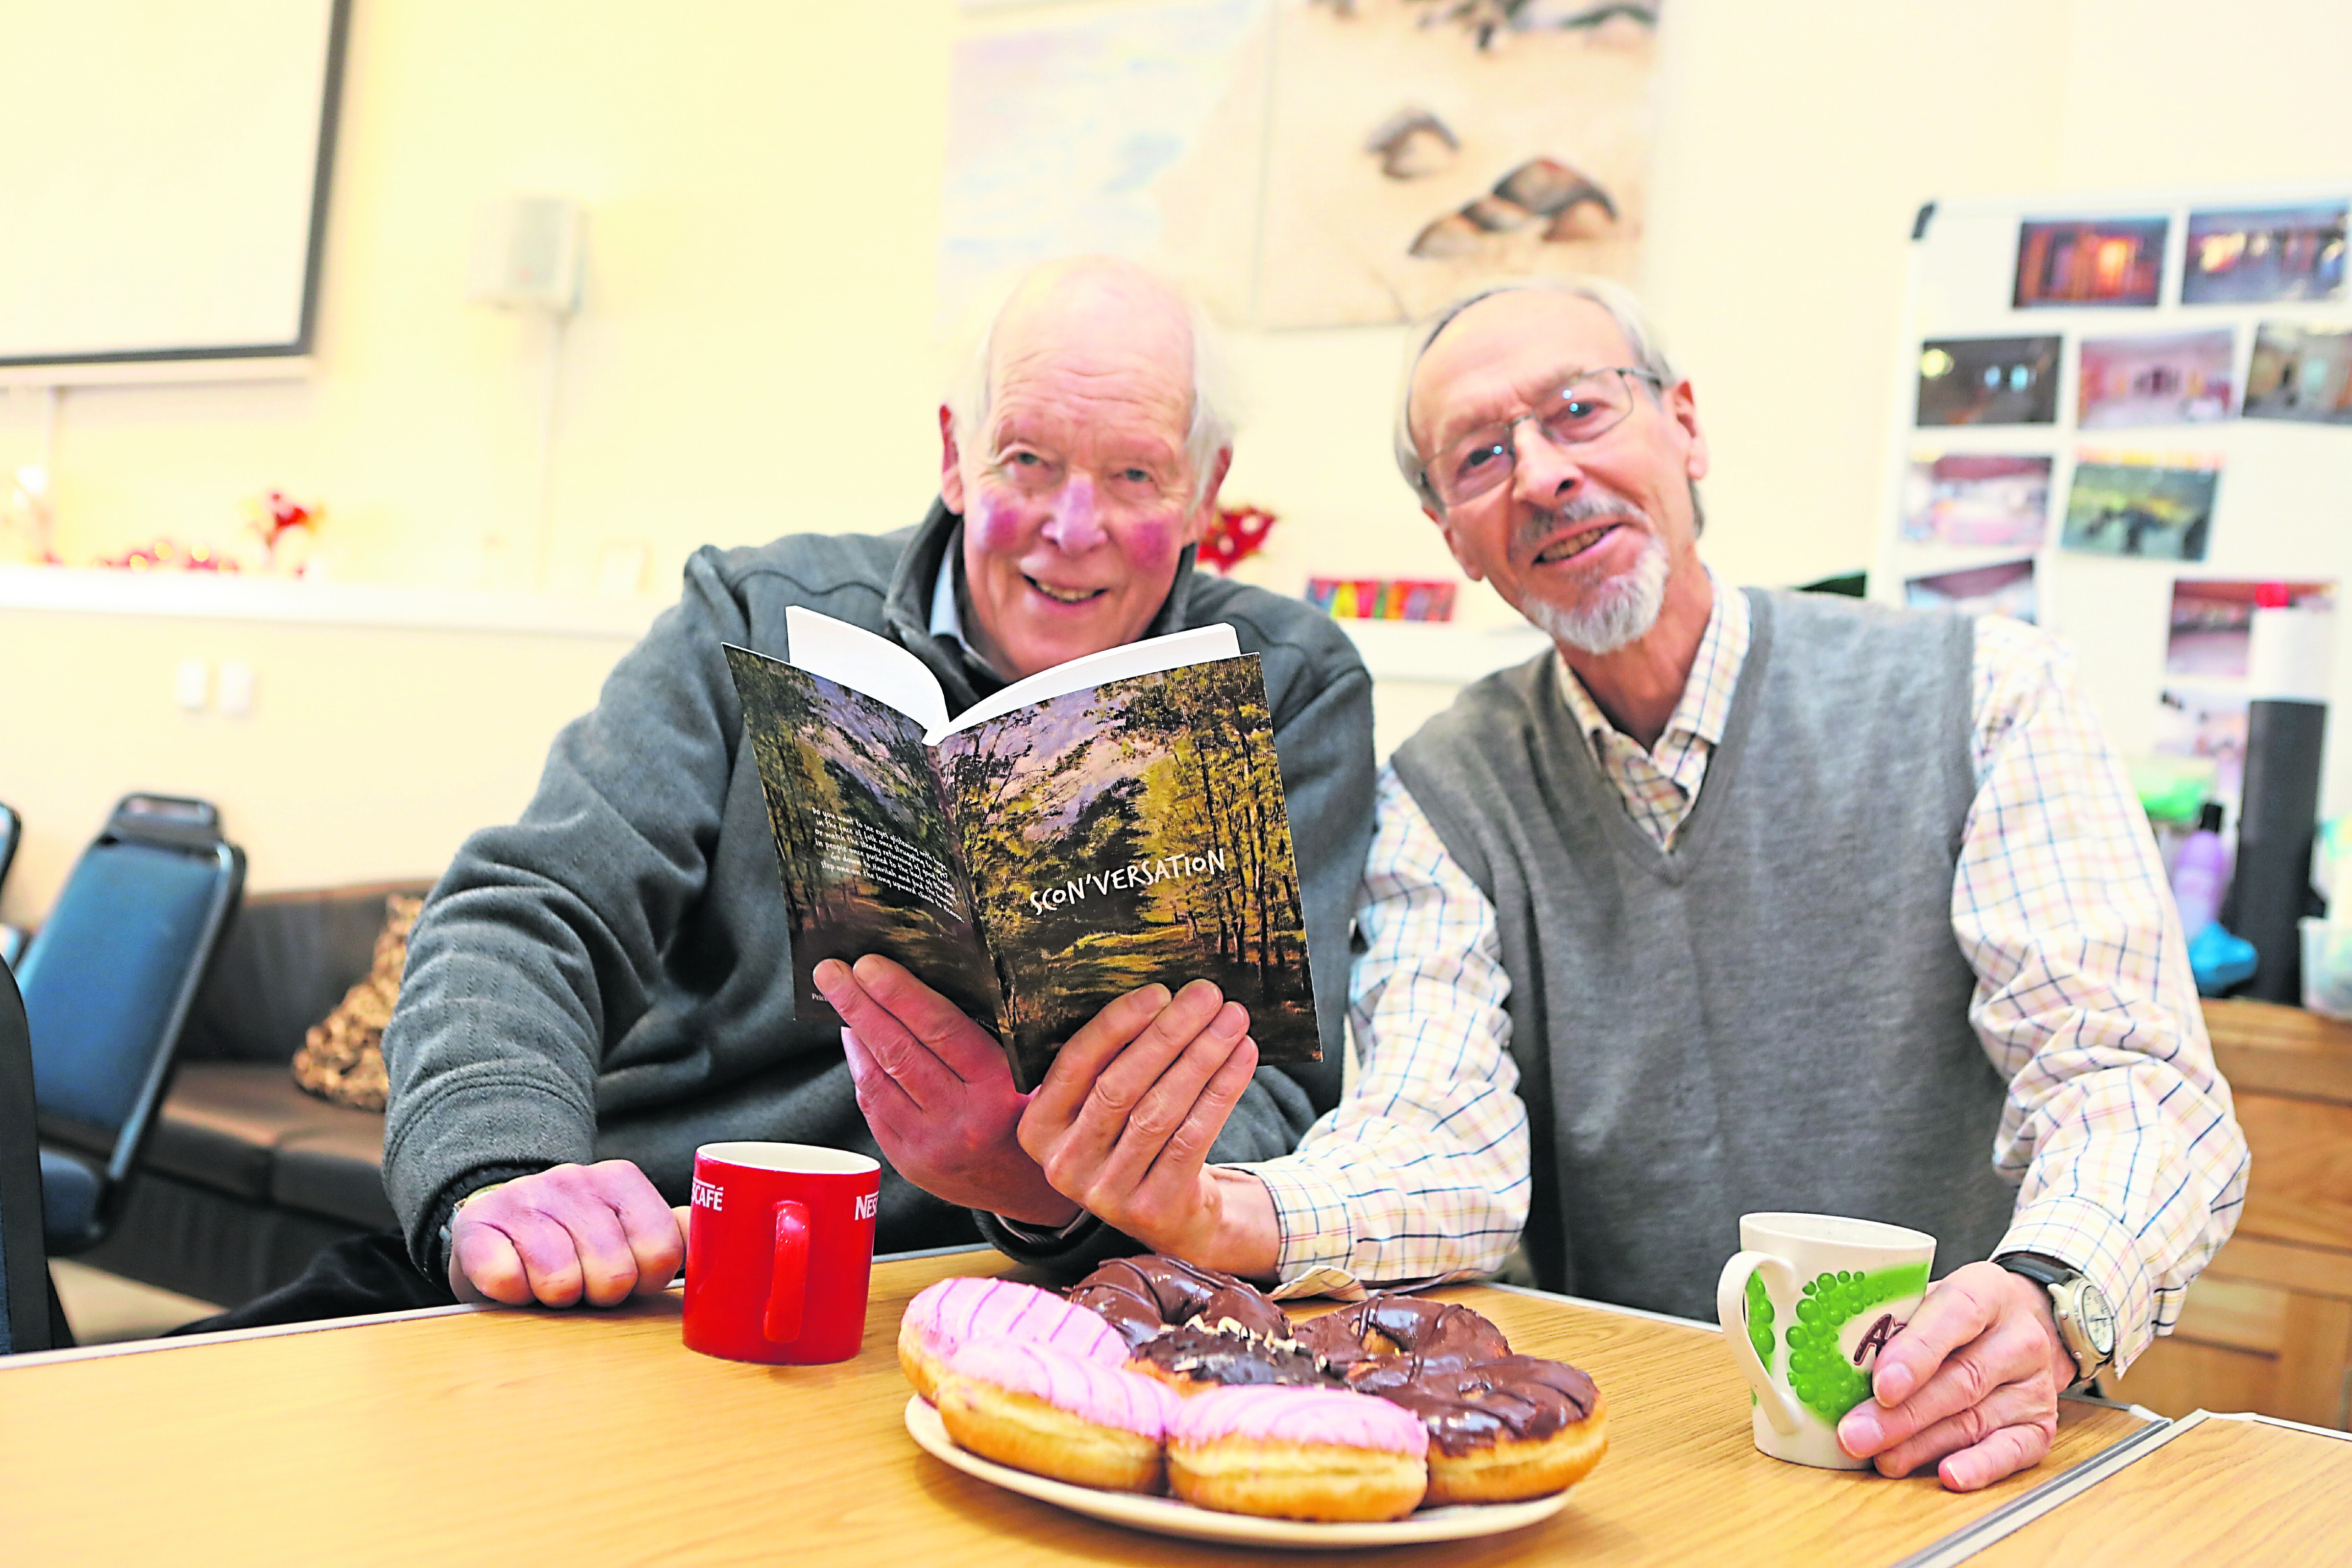 David Conran - Smith, left, and Robert Ramsay, with their poetry book "Scon'versation".